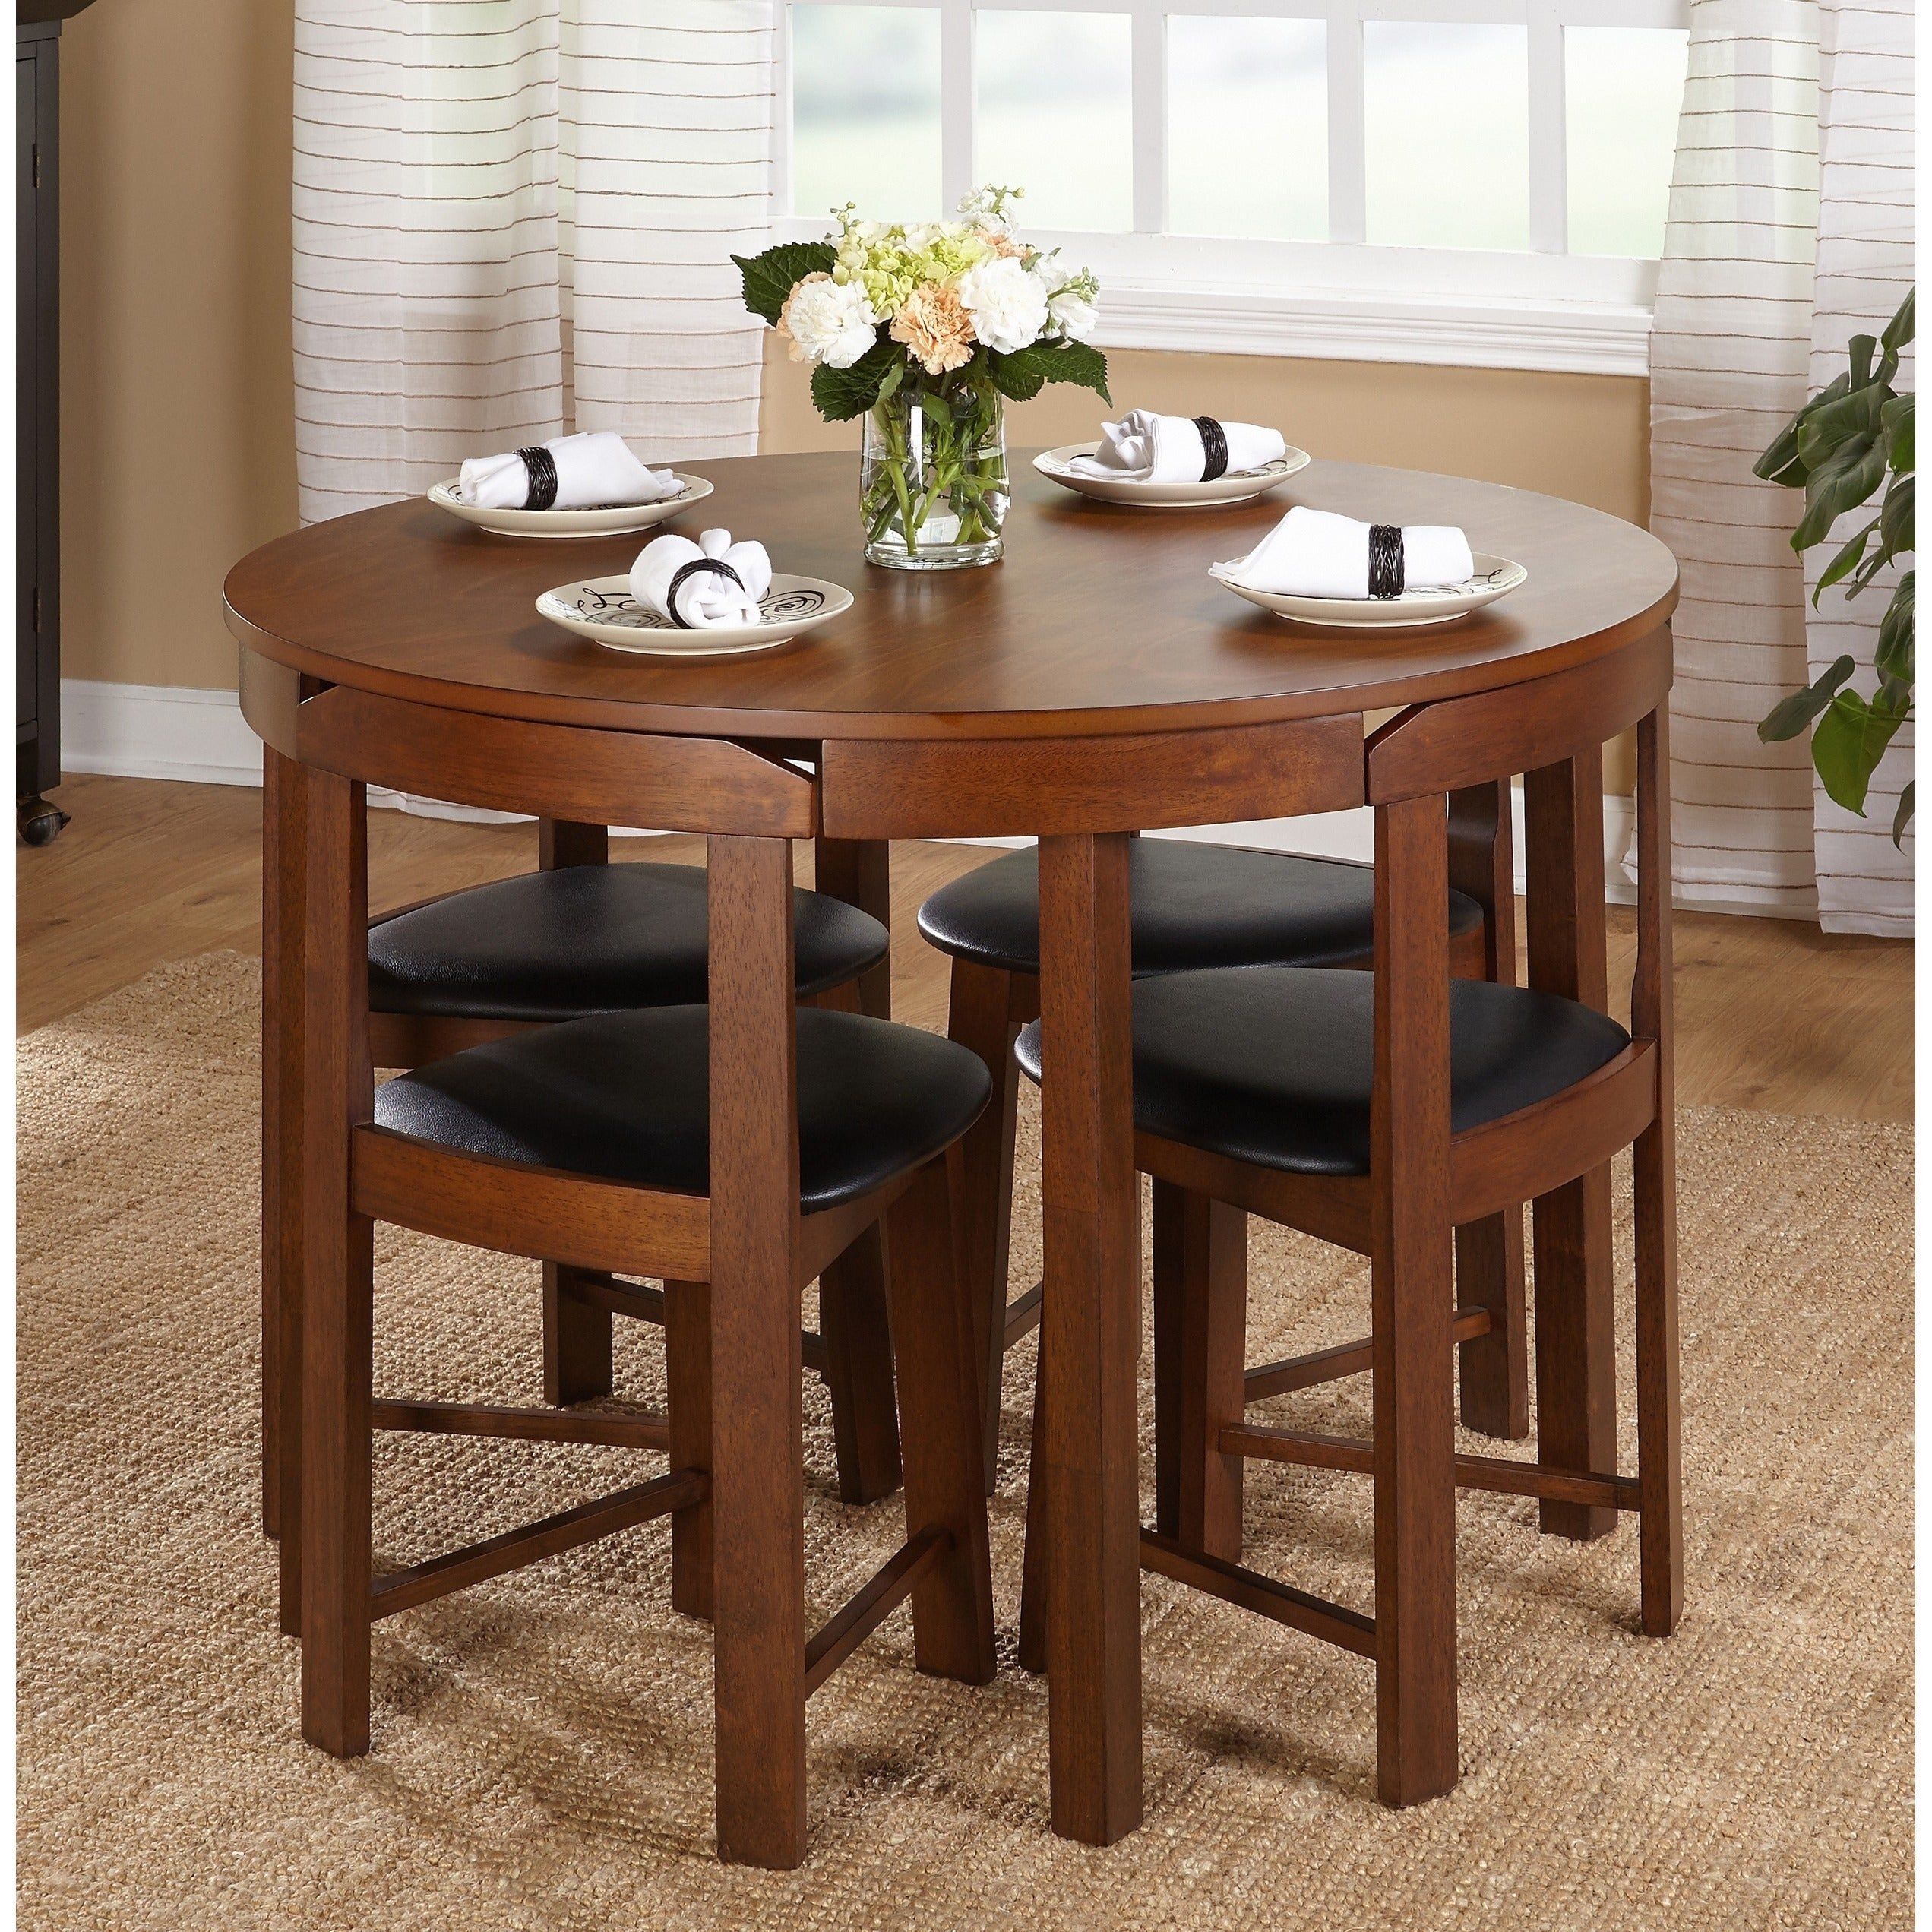 Shop Harrisburg 5 Piece Tobey Compact Round Dining Set Free – Layjao Intended For 5 Piece Round Dining Sets (View 7 of 15)